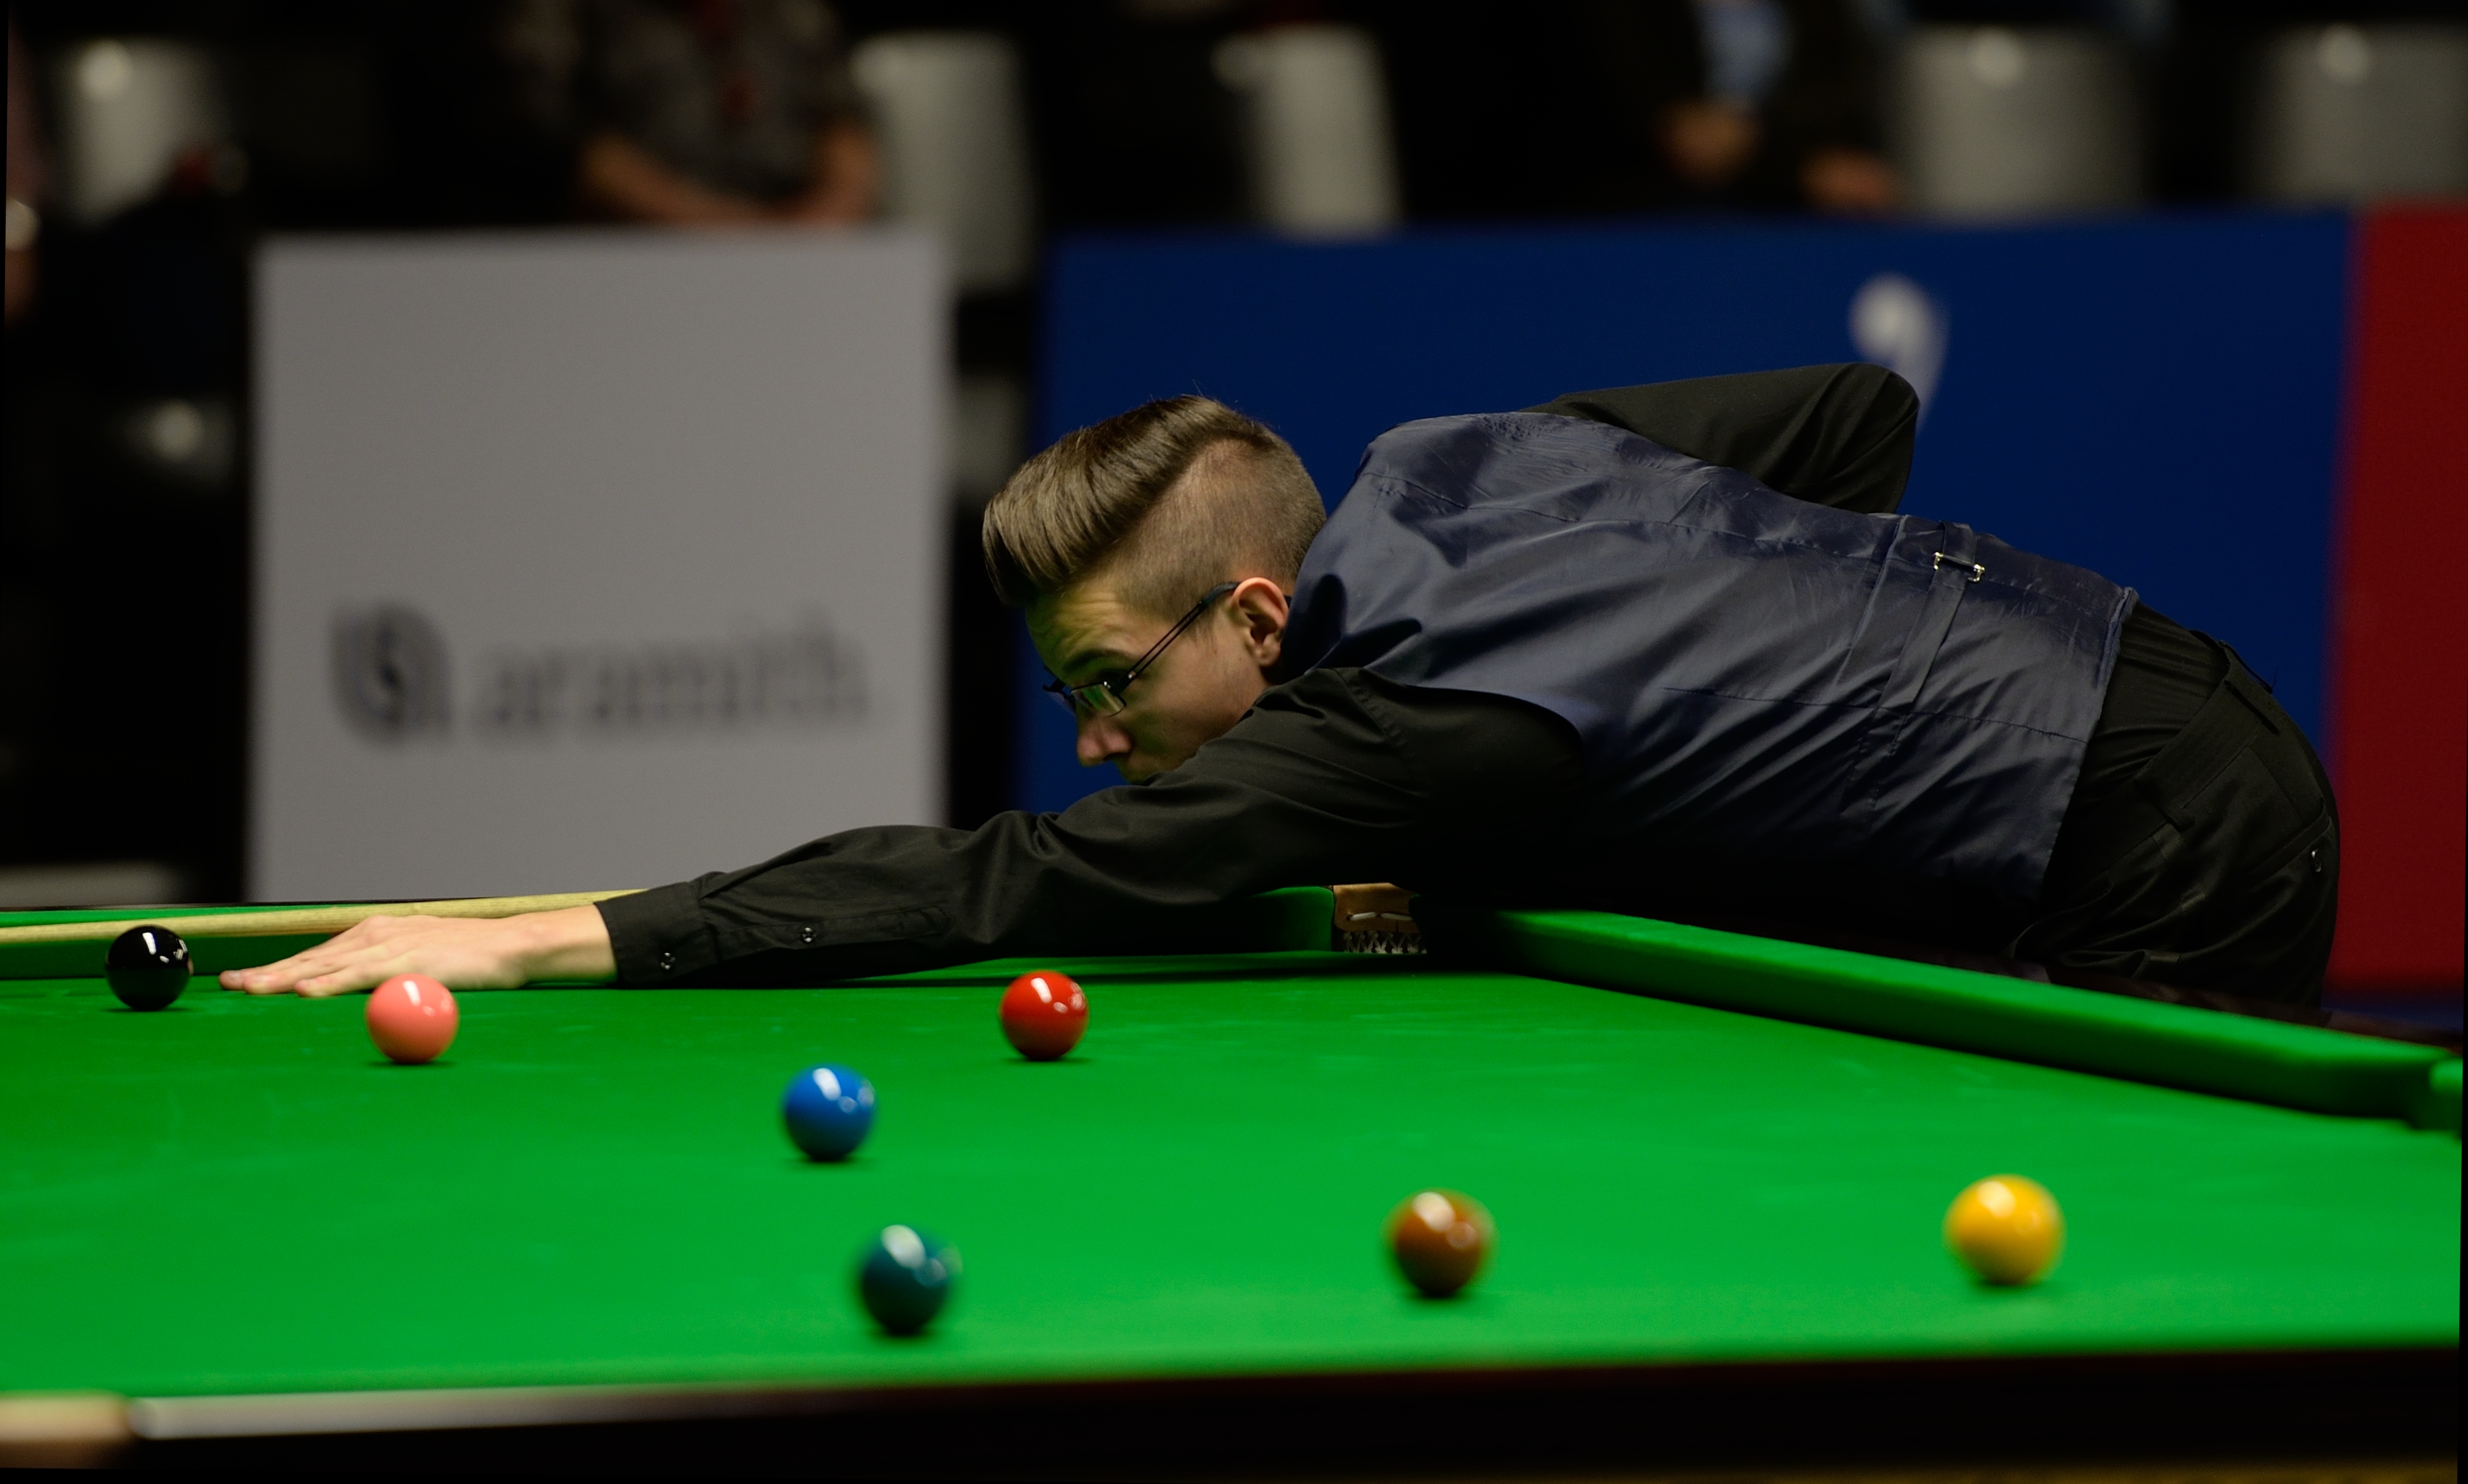 Ashley Carty at Snooker German Masters (DerHexer) 2015-02-04 06